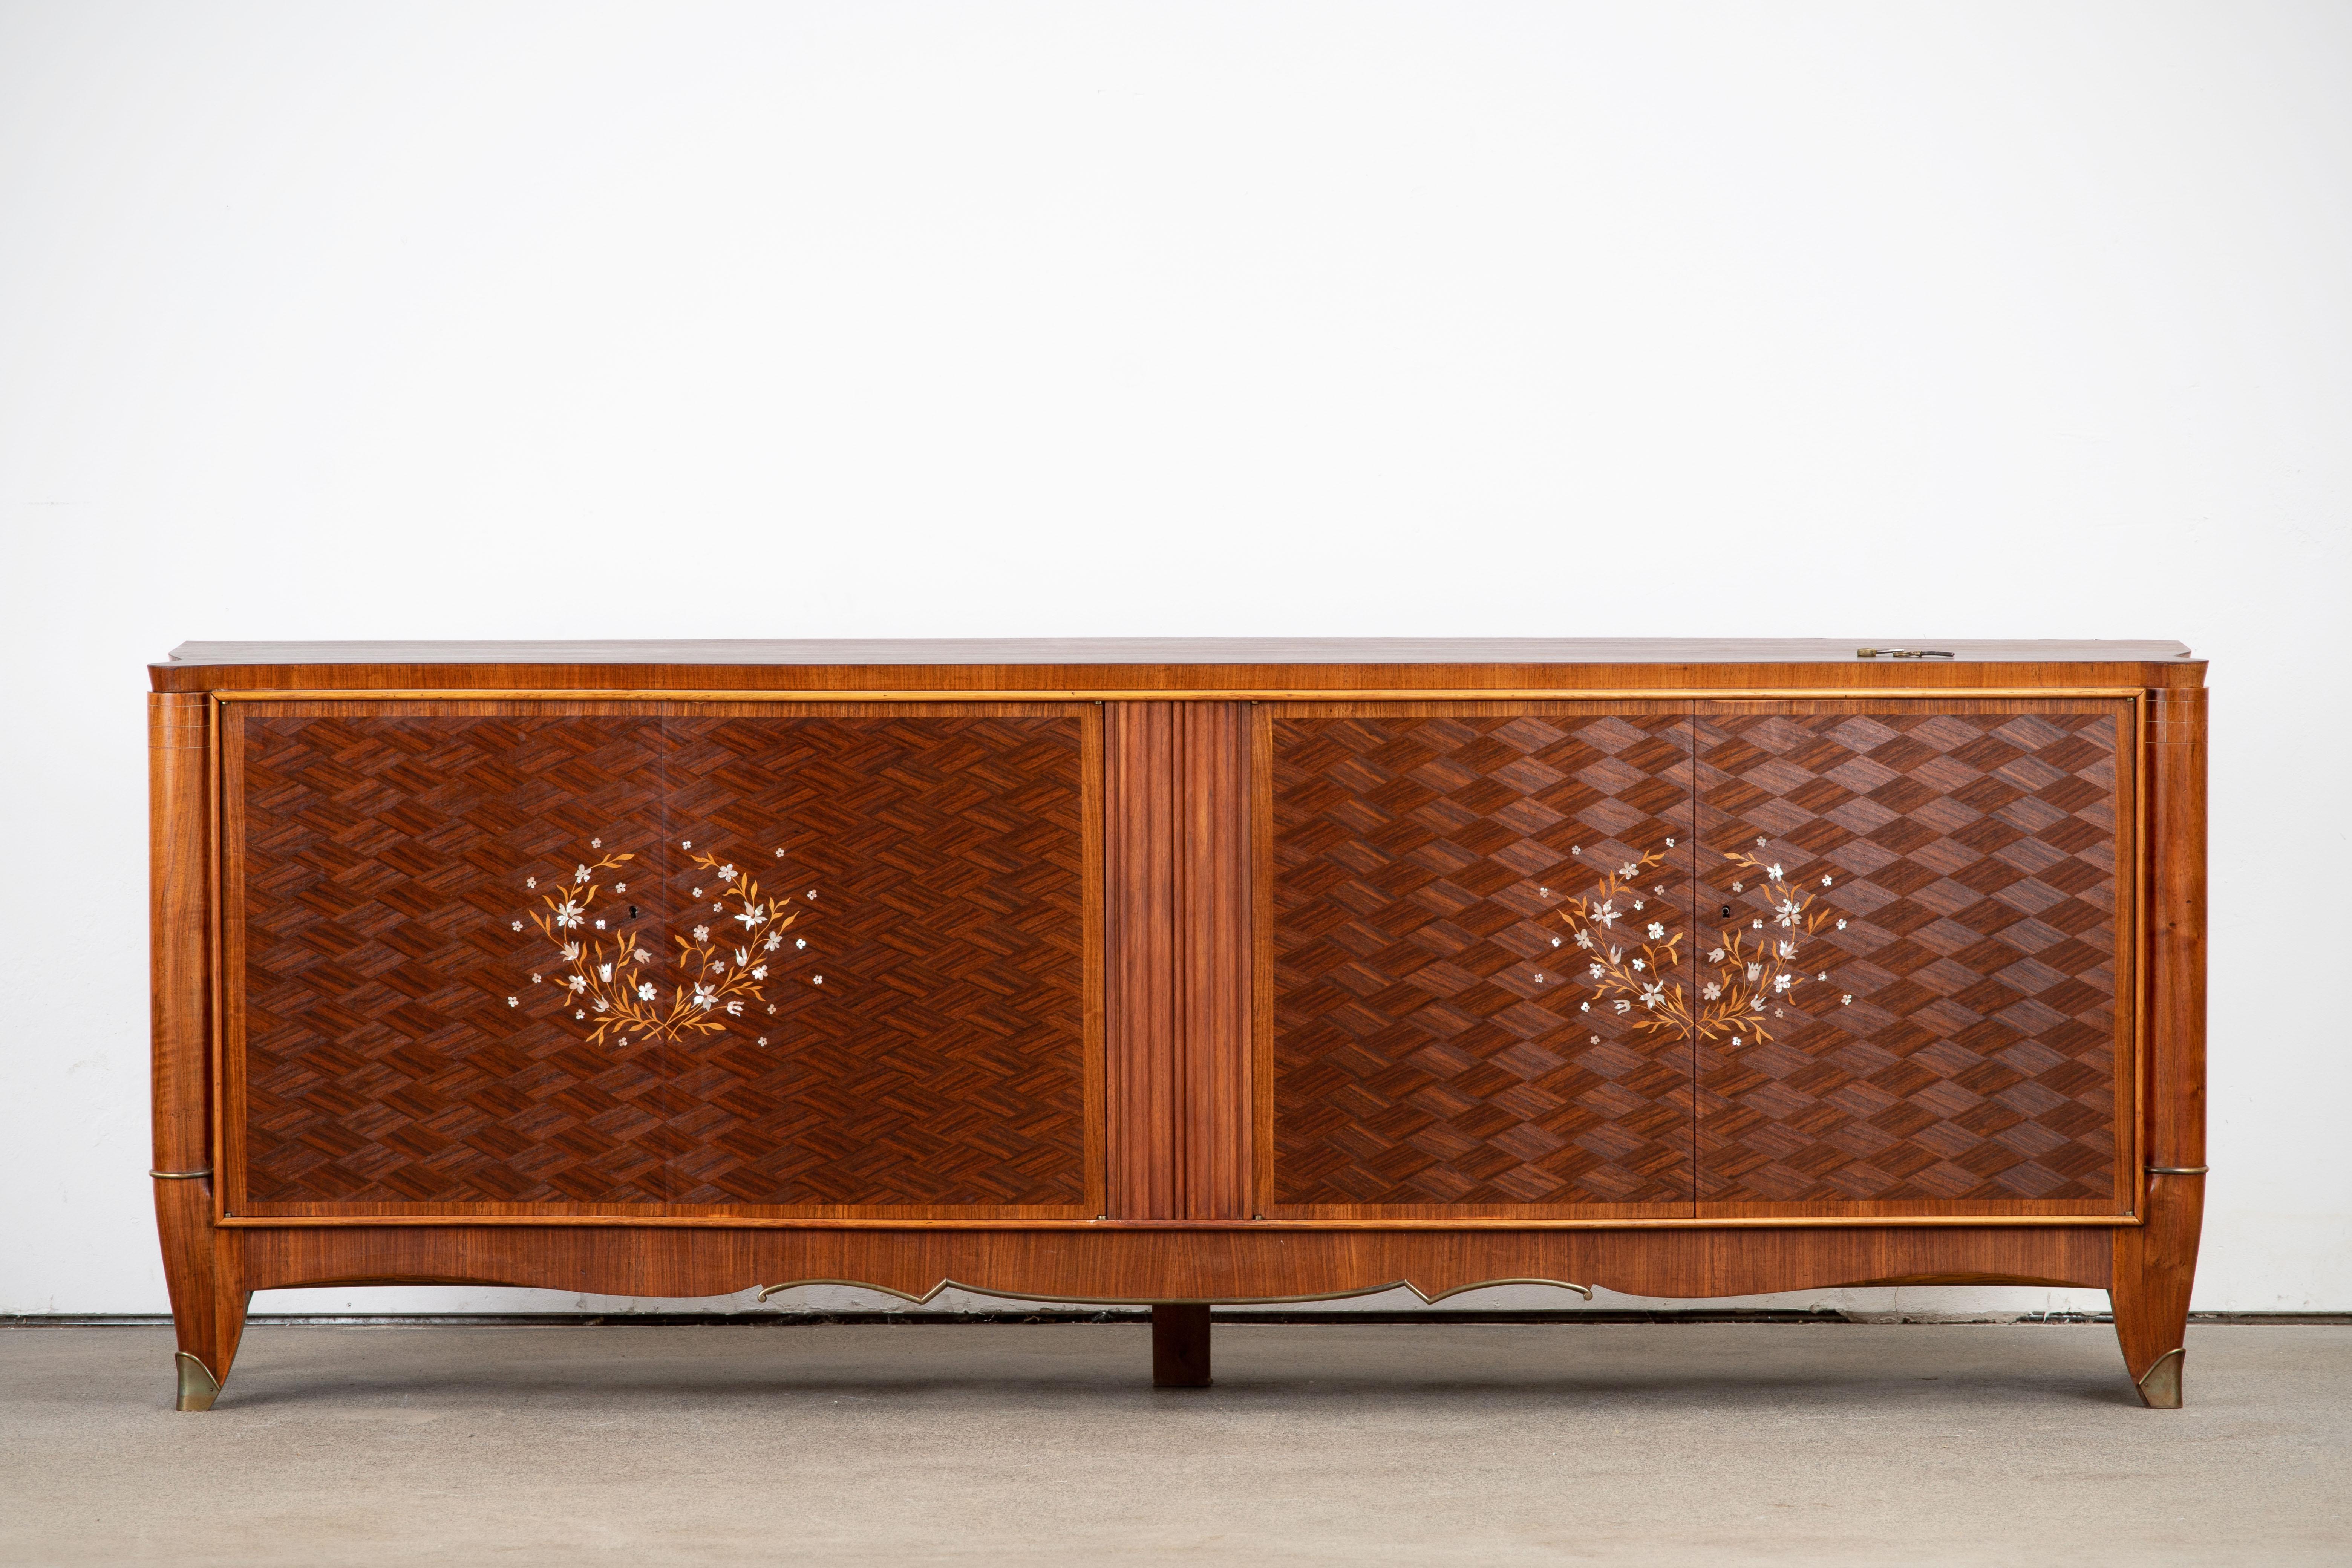 This French Art Deco sideboard, credenza was found in a little Castle in Normandy; France. The sideboard features stunning Macassar ebony wood grain with a thin decorative mother of pearl inlay design with butterflies and birds. The inside is also a